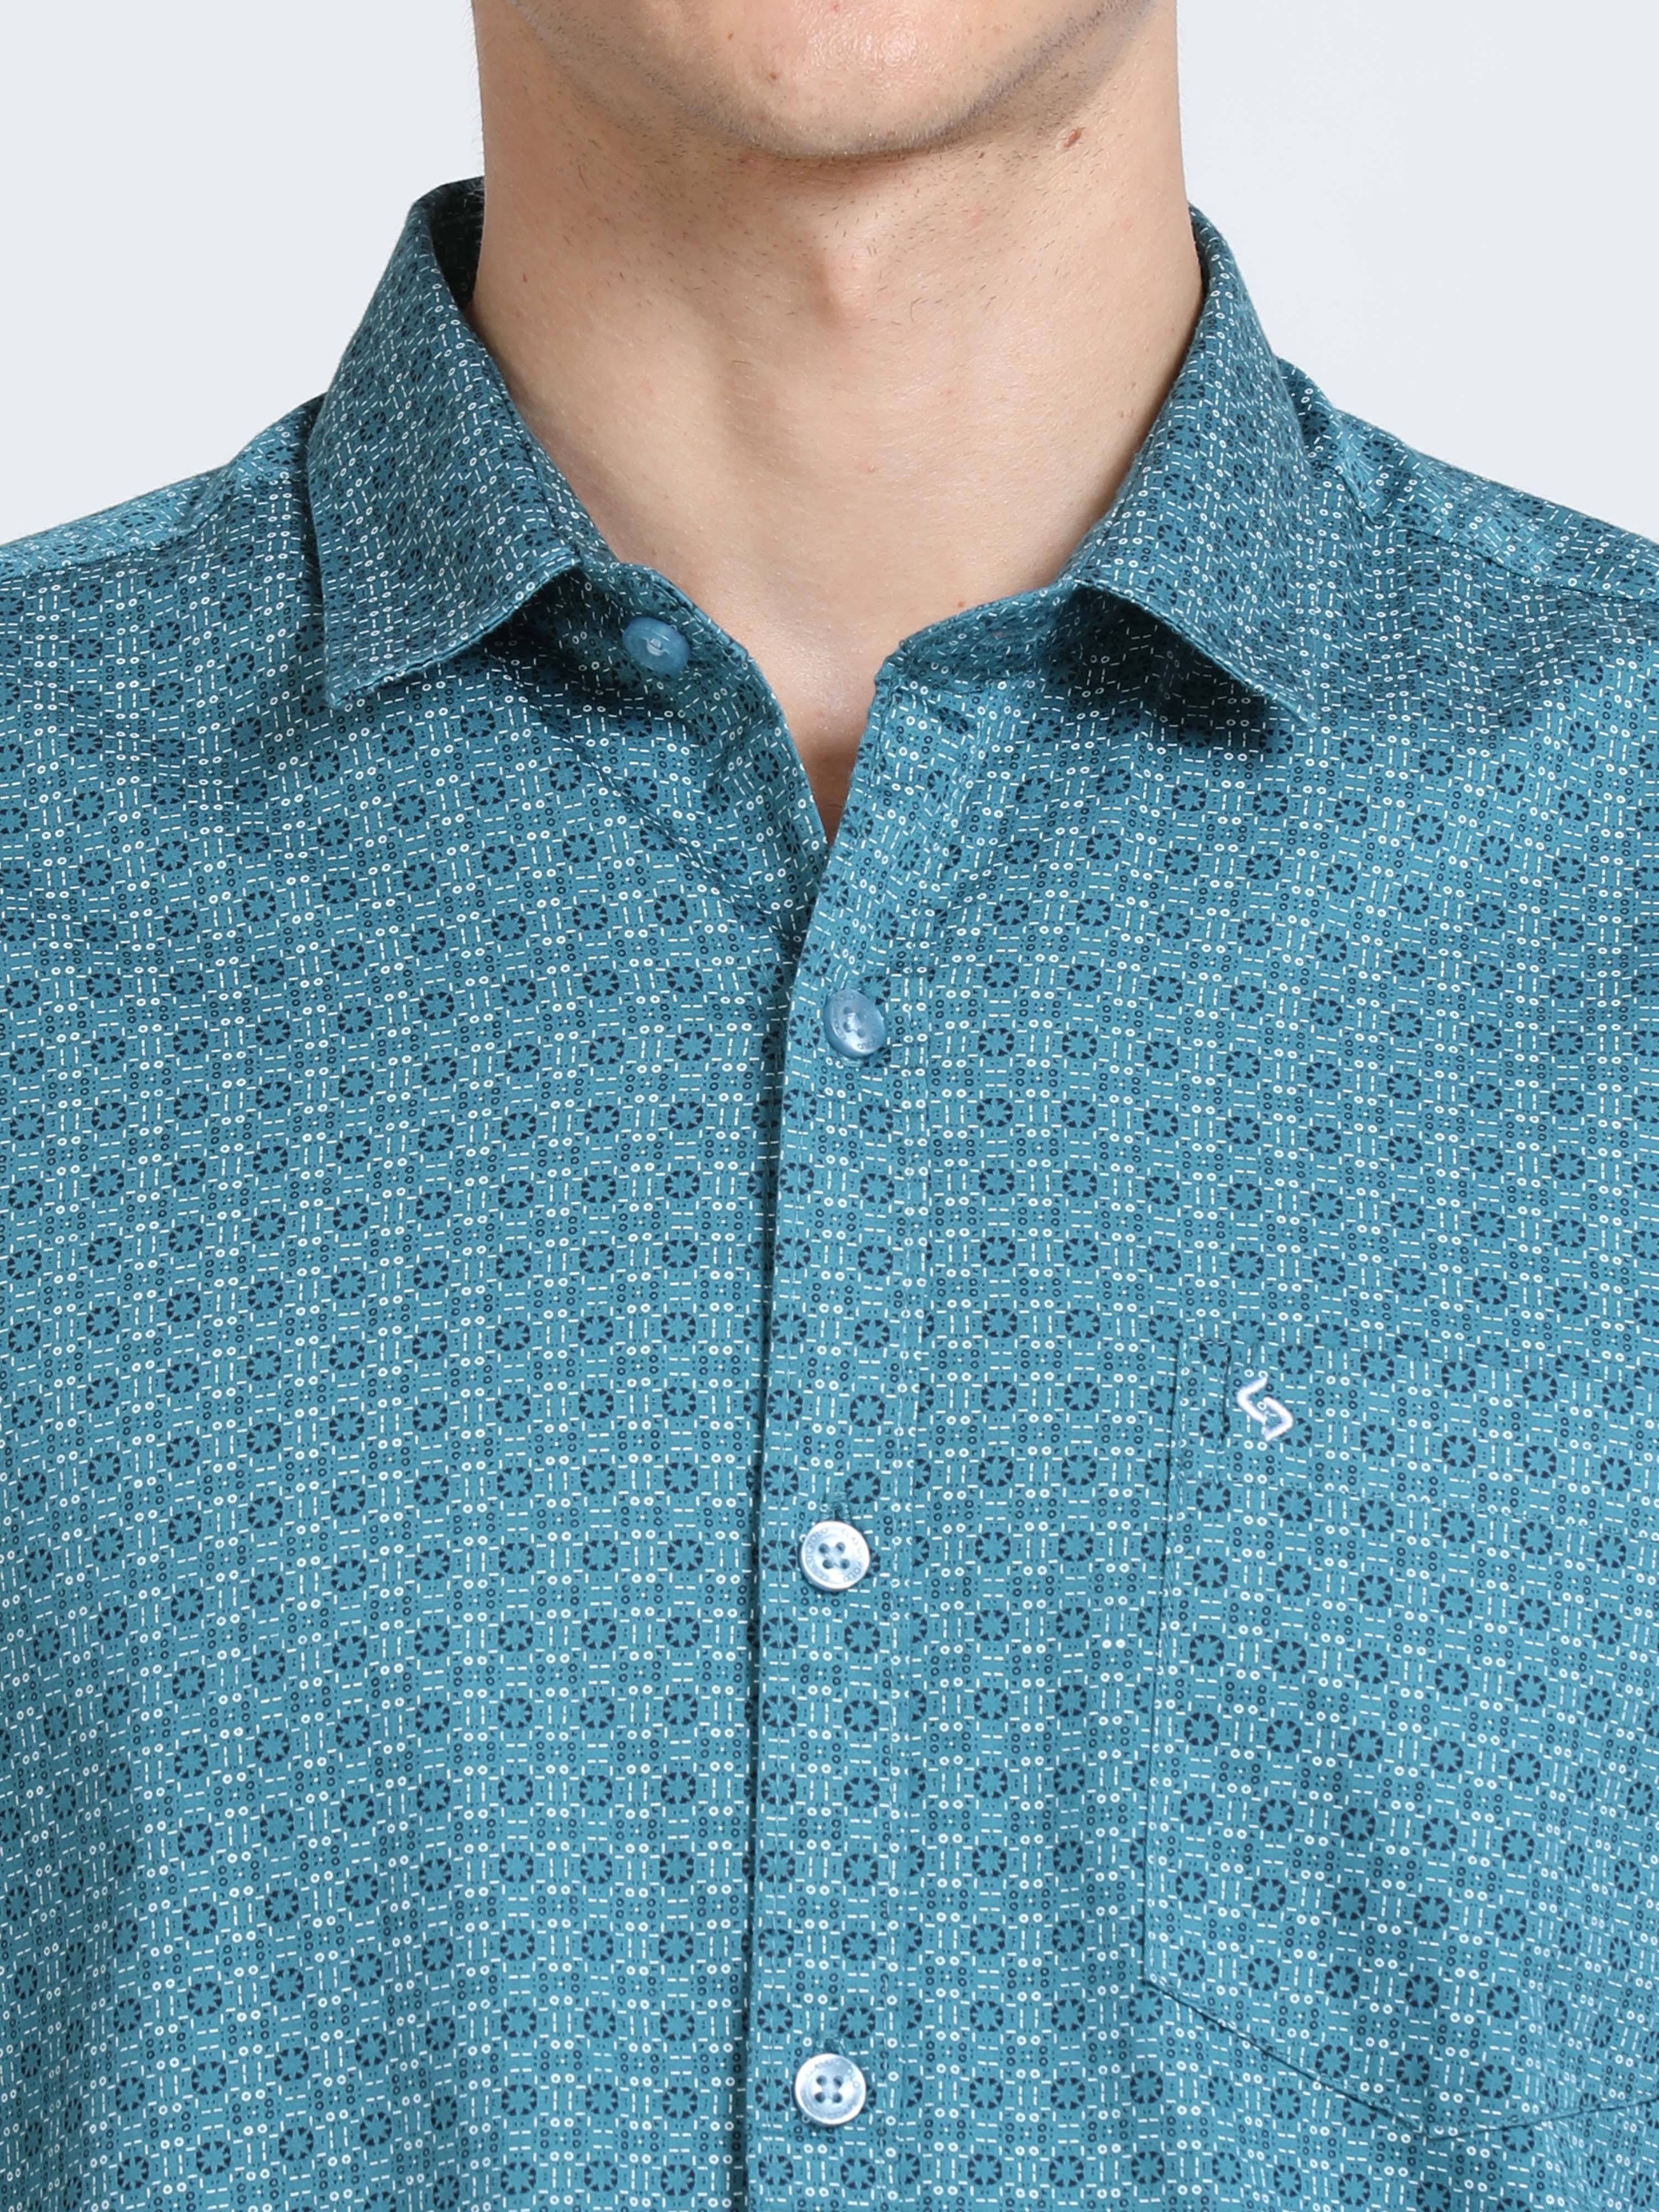 Classic Polo Mens Pure Cotton Polo Neck Printed Full Sleeves Turquoise Color Woven Shirt | So2-171 A-Fs-Prt-Sf